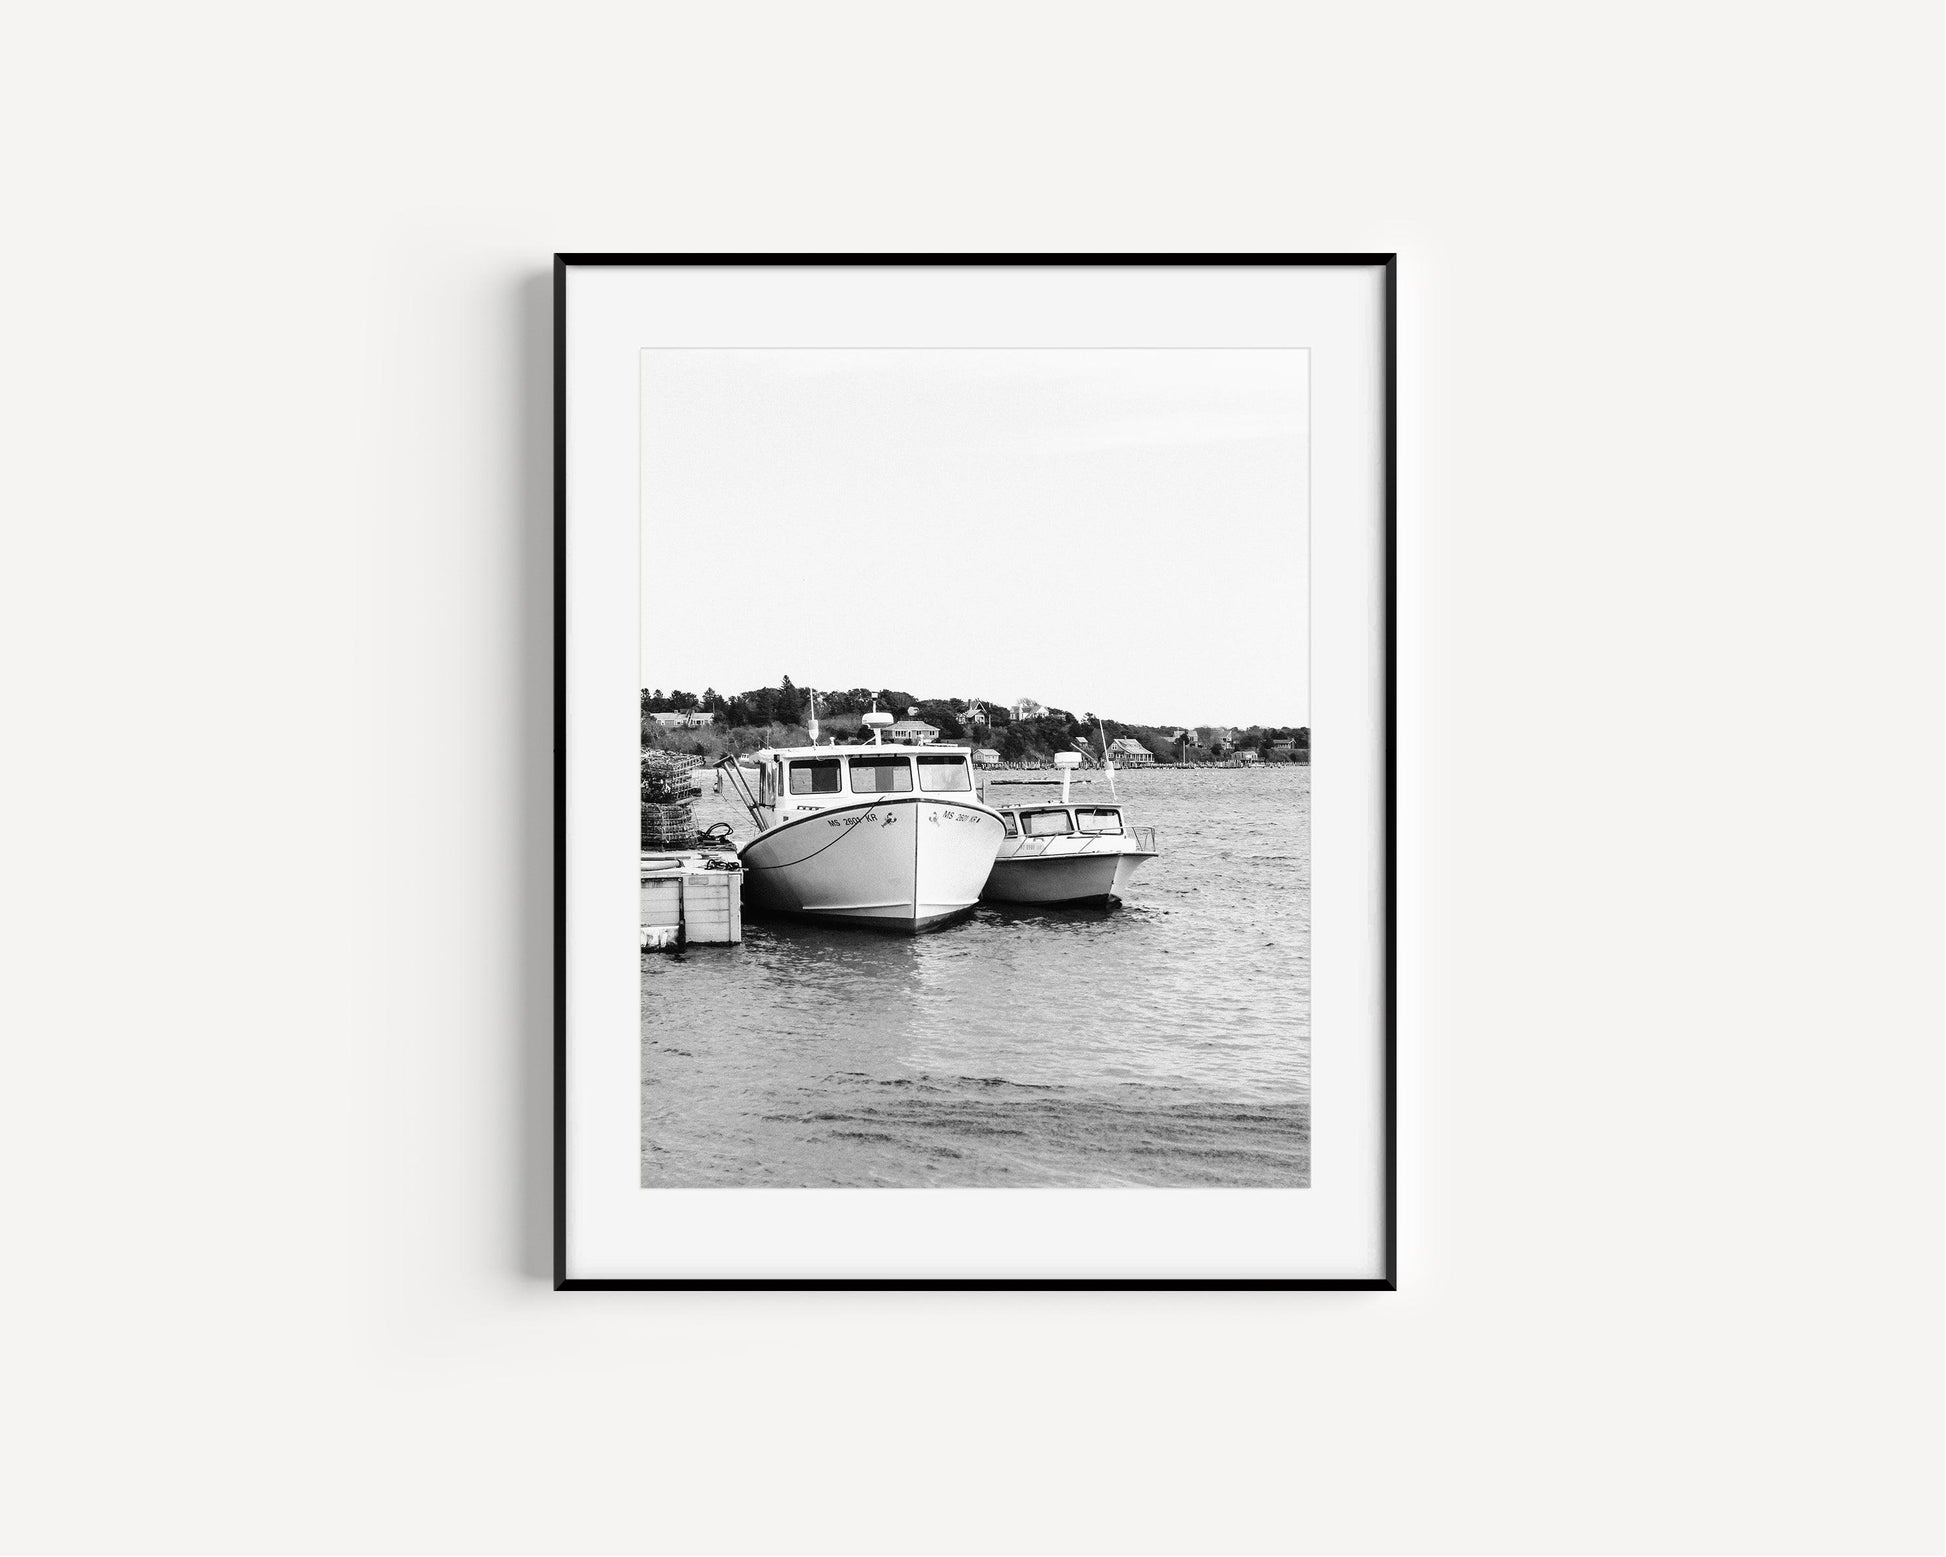 Black and White Boat Photography Print | Beach Photography Print - Departures Print Shop